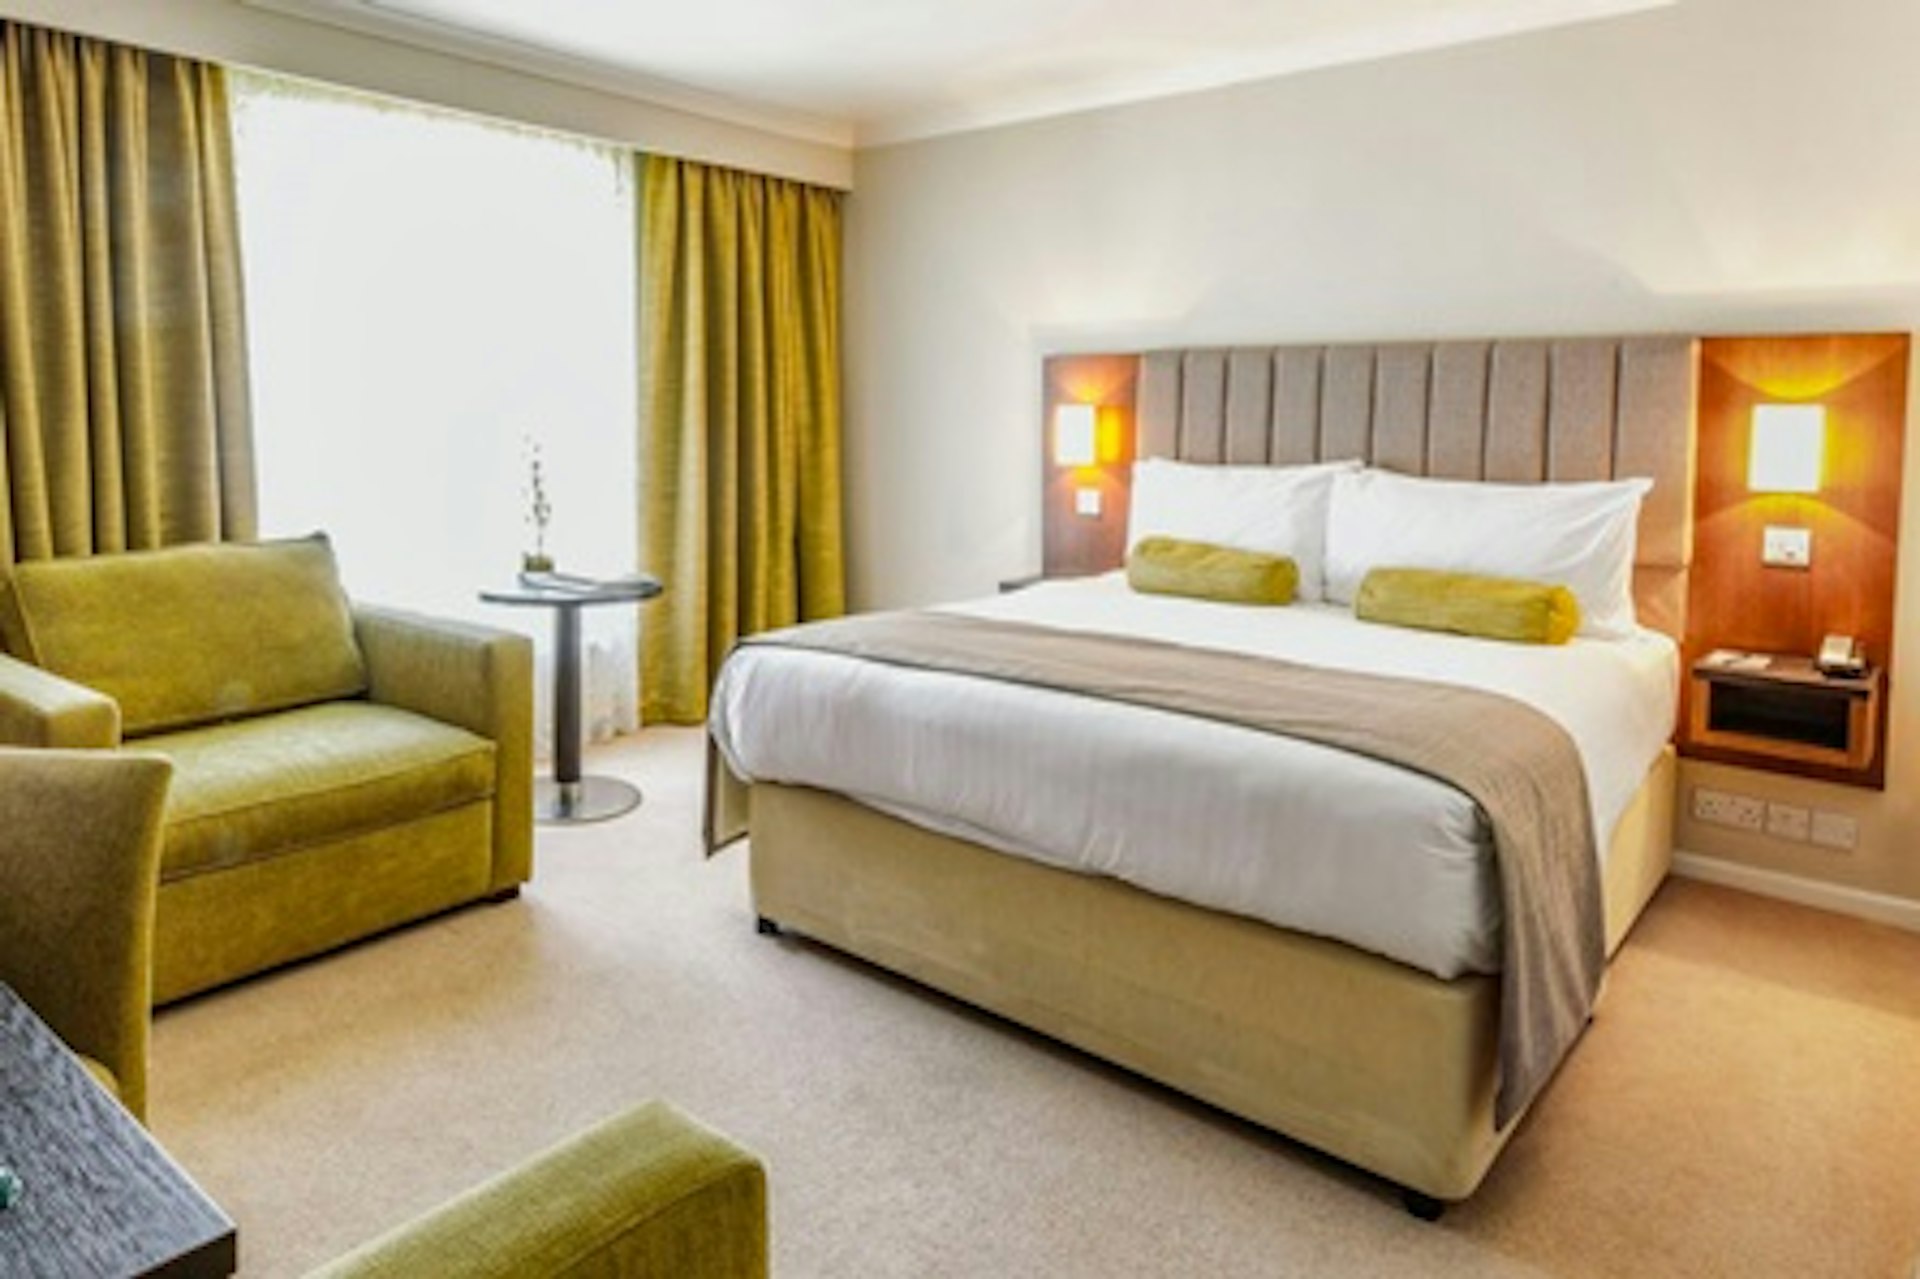 One Night Break with Dinner for Two at Sudbury House Hotel & Restaurant 3